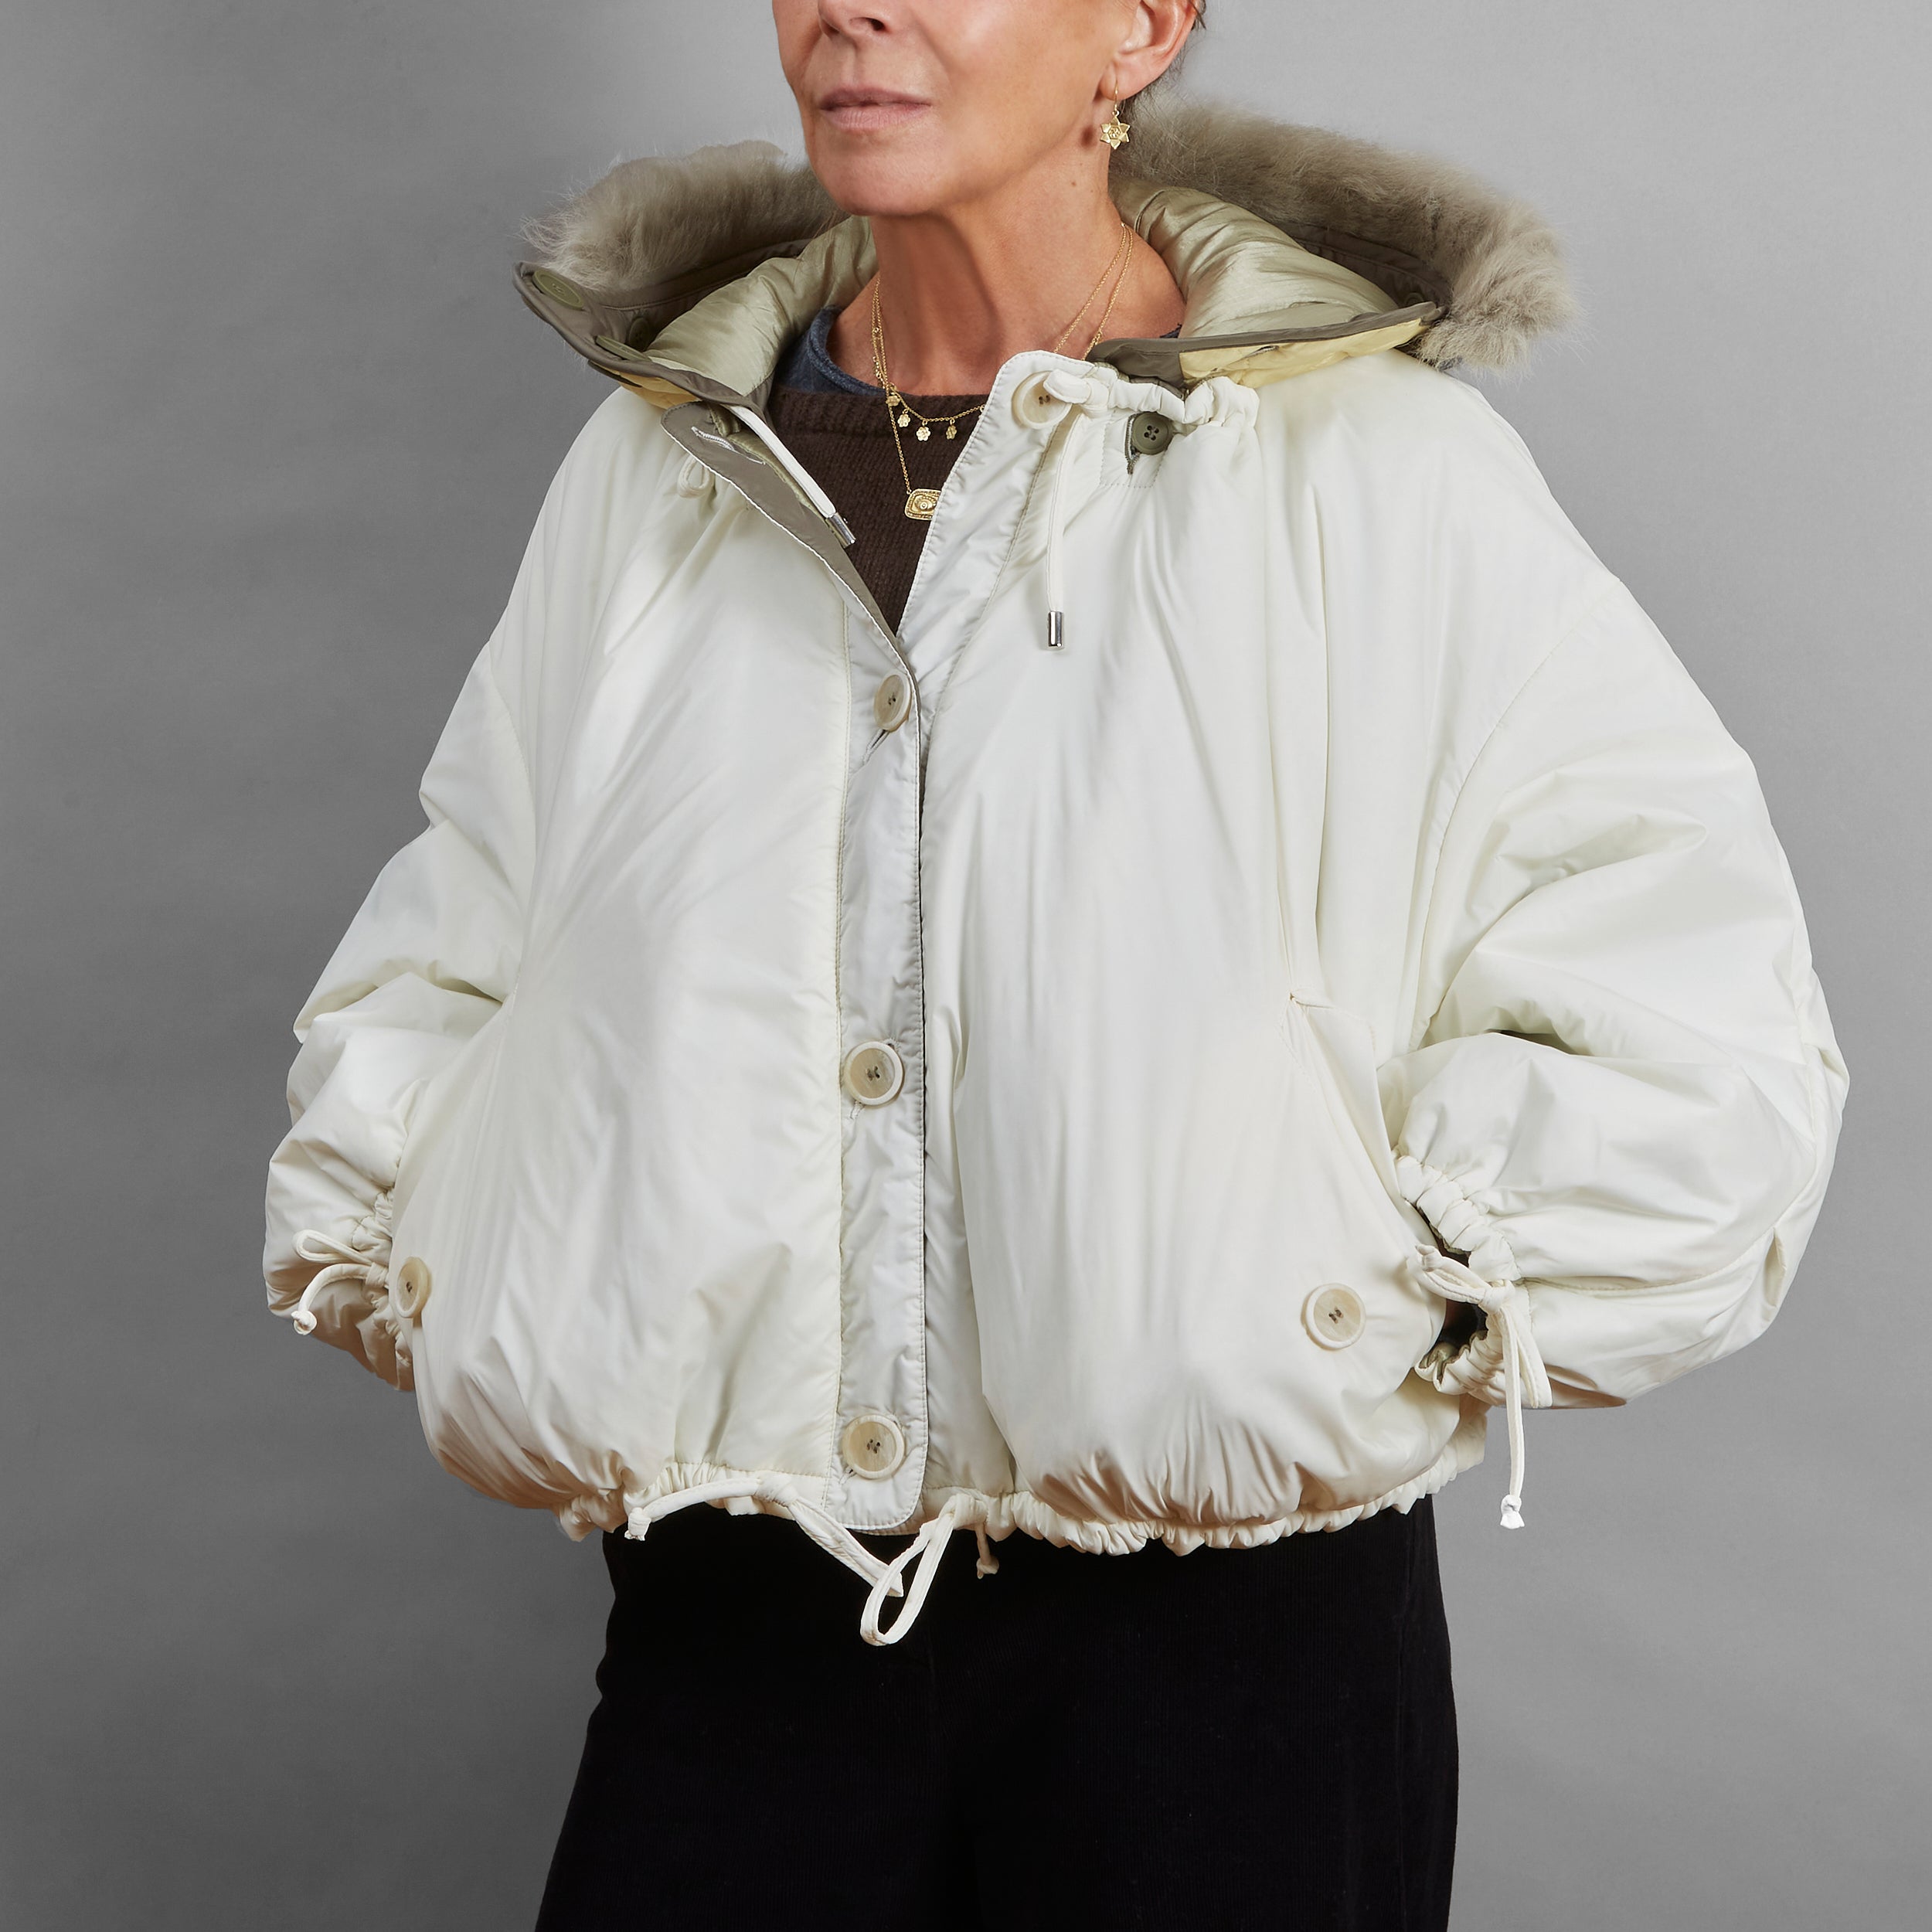 Hetre Alresford Hampshire Boutique Clothes Shop Marfa Stance Pale Sage White Reversible Parachute Bomber With Reversible Hood  